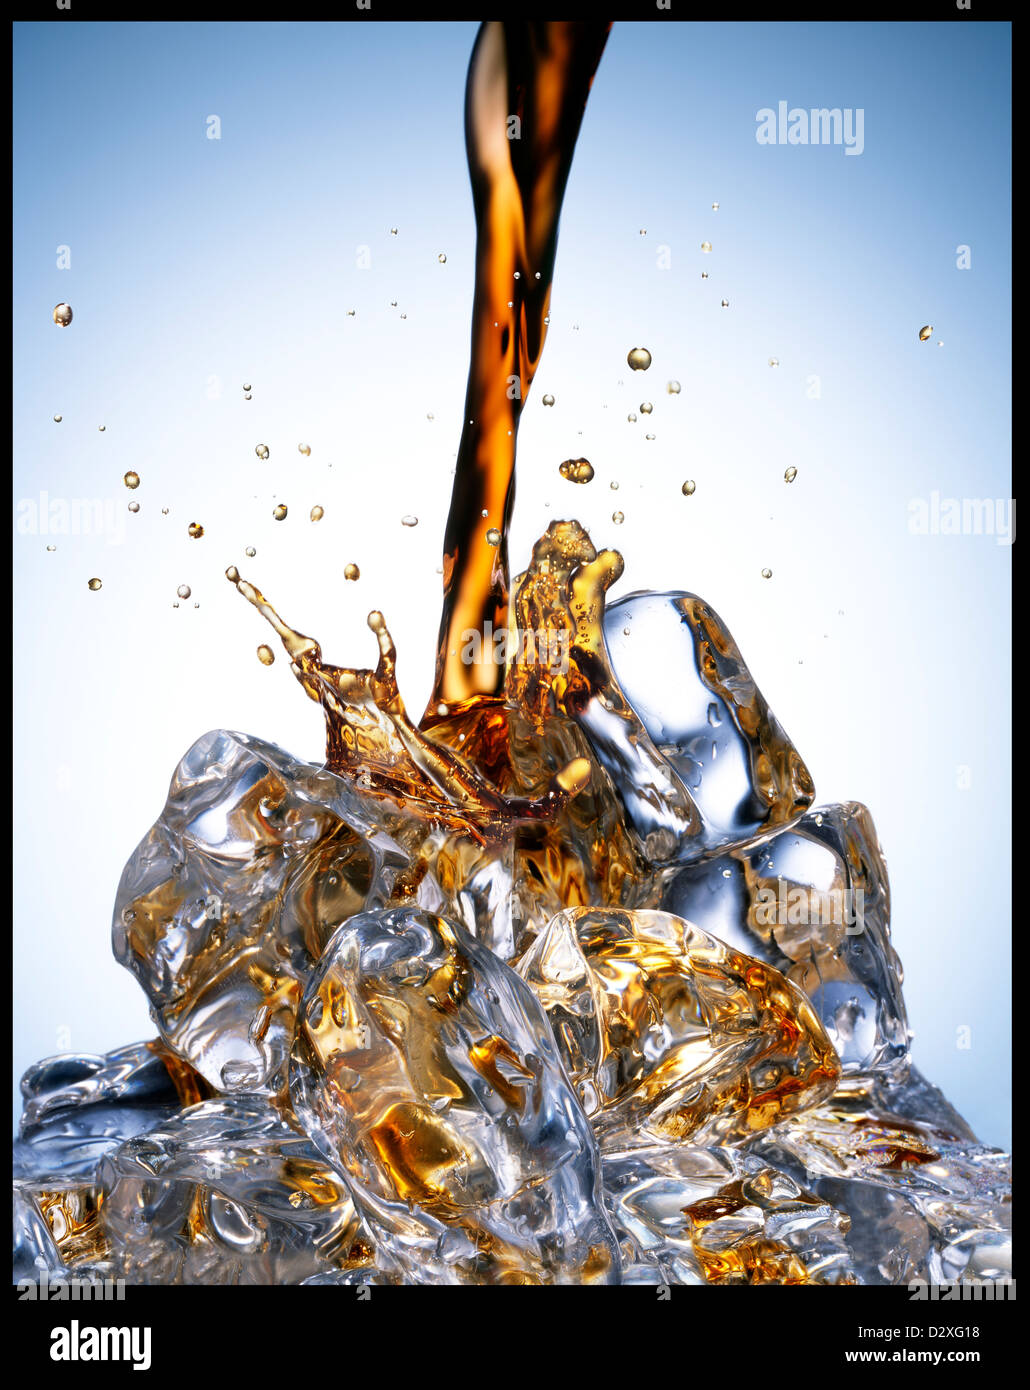 Soda pouring over ice Stock Photo